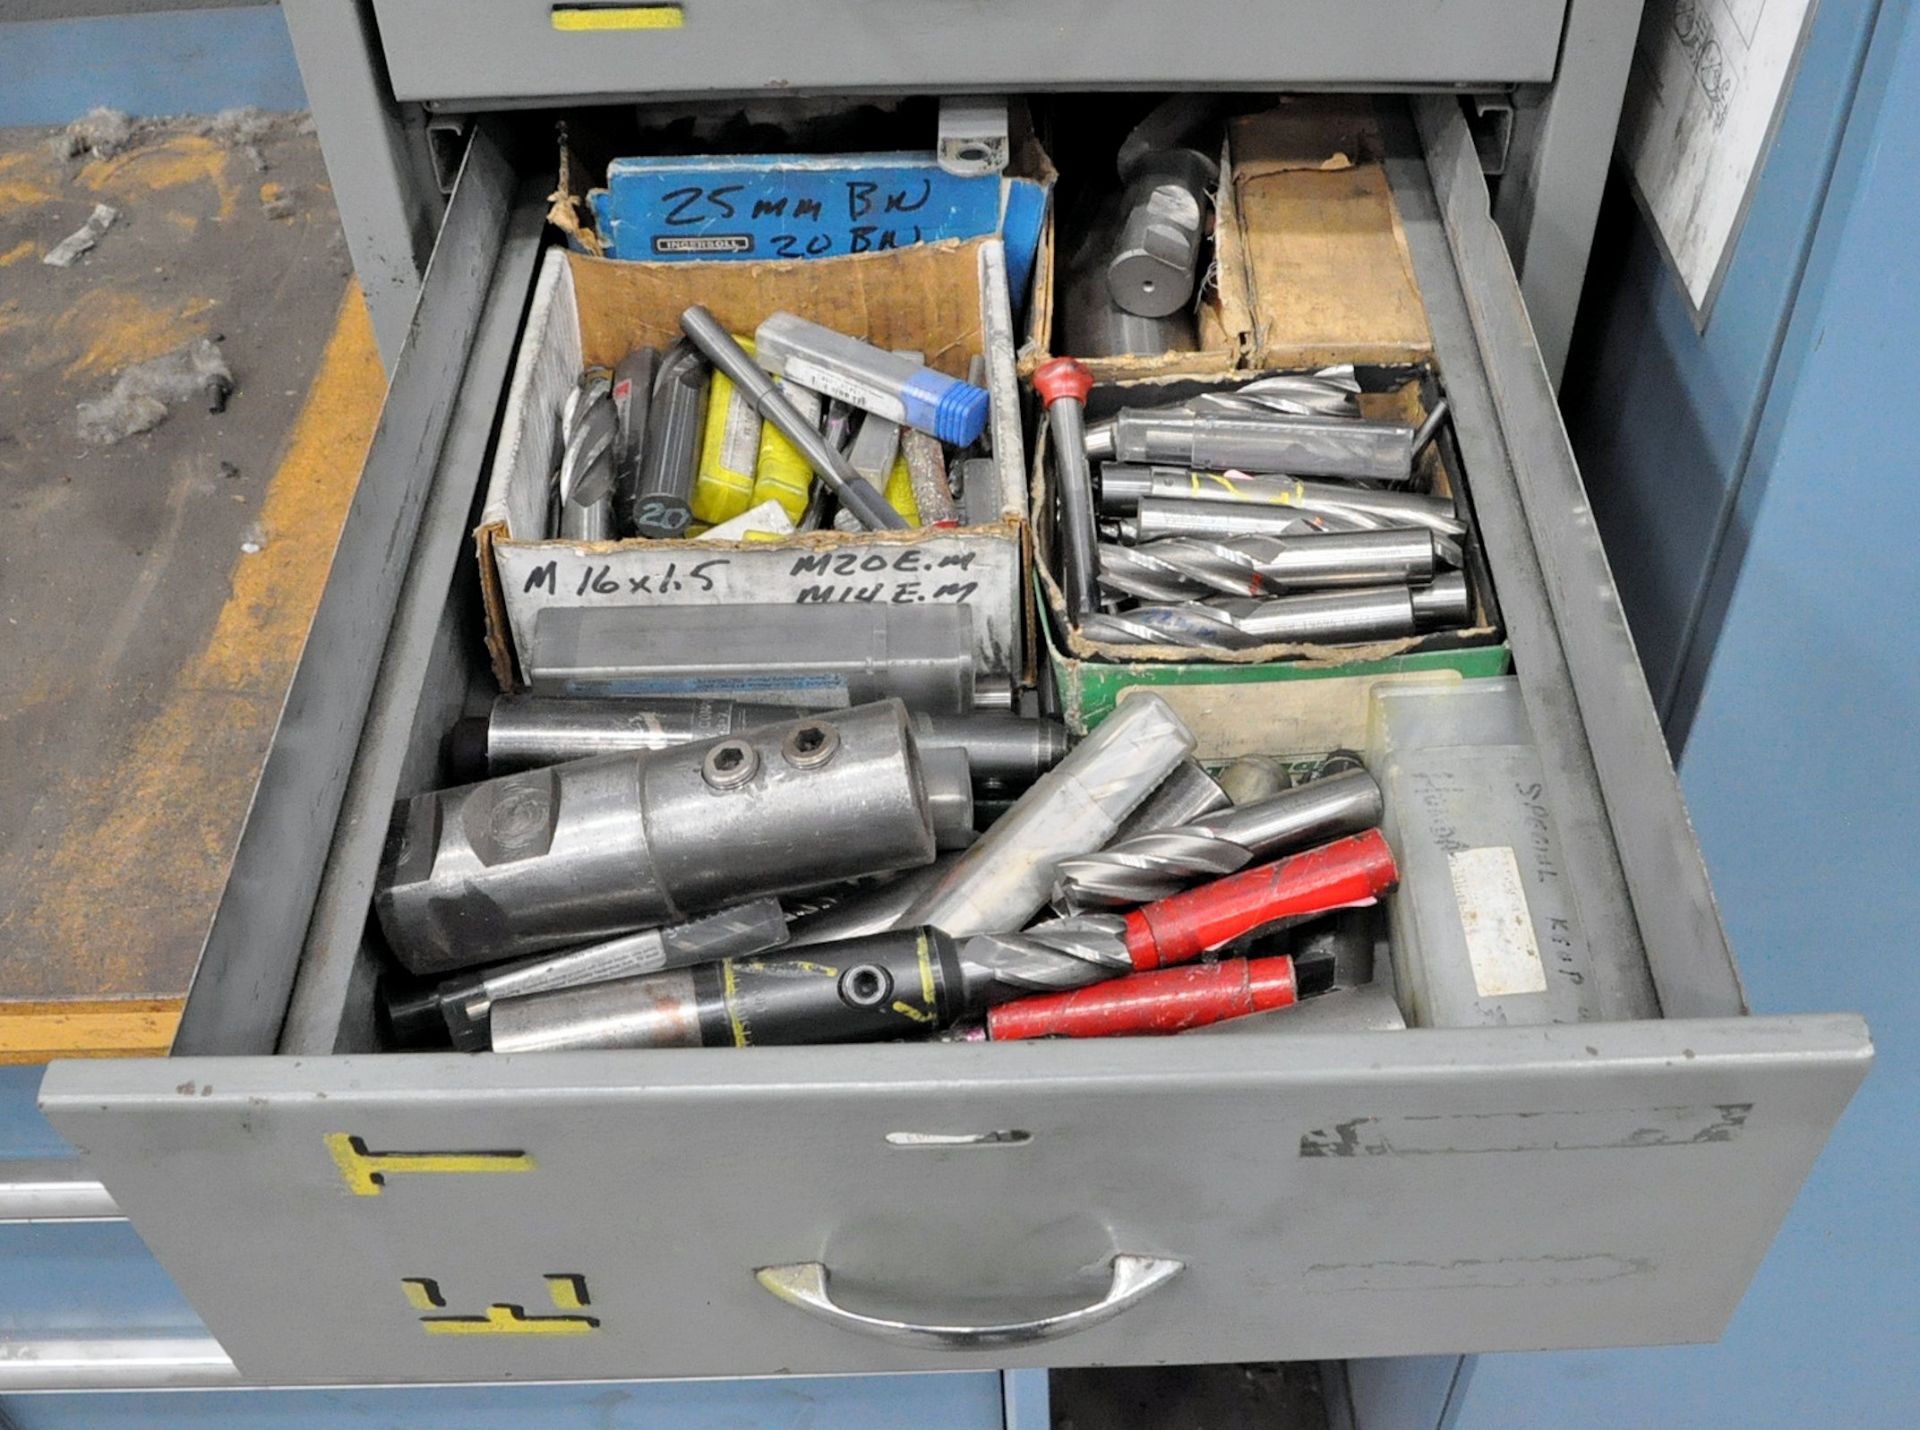 Lot-(1) 4-Drawer Cabinet with Various Metric Cutters and Inserts Contents, (A-24), (Yellow Tag) - Image 3 of 5